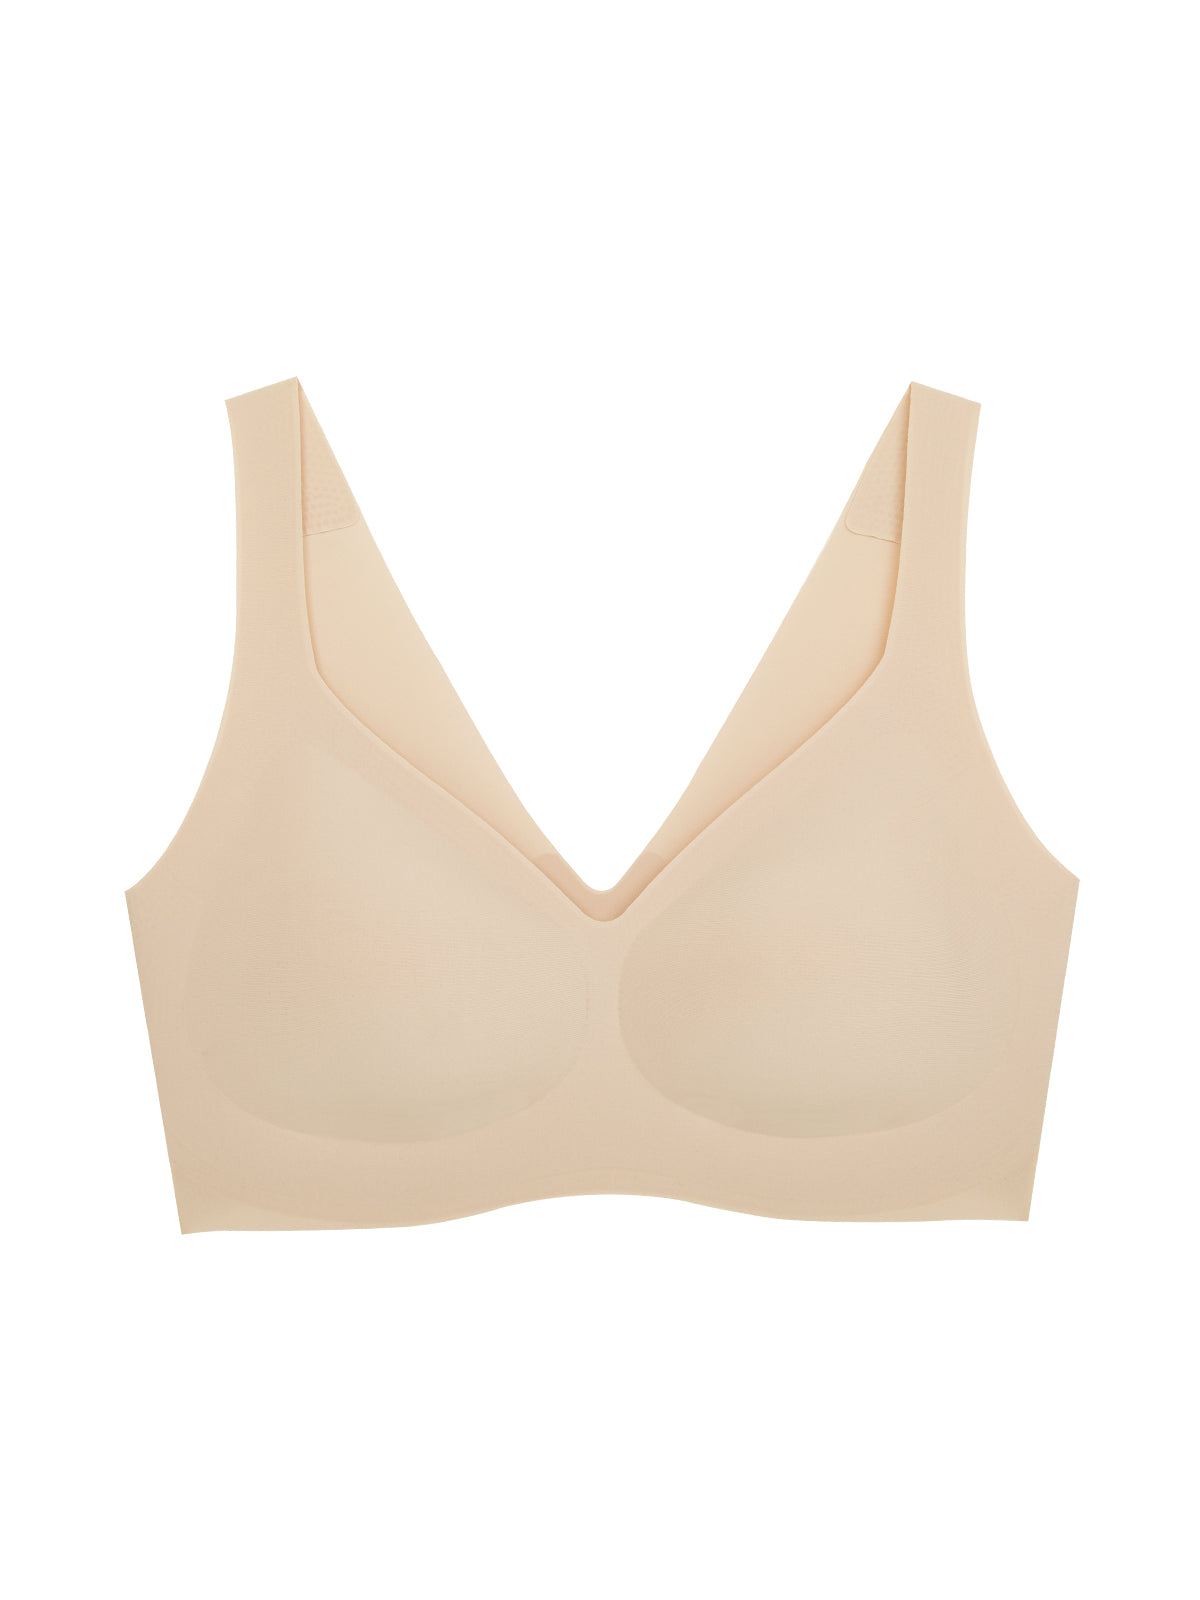 Shop Wireless Bras Made in Canada, Cup Sizes AAAA to ZZZZ Bands 24